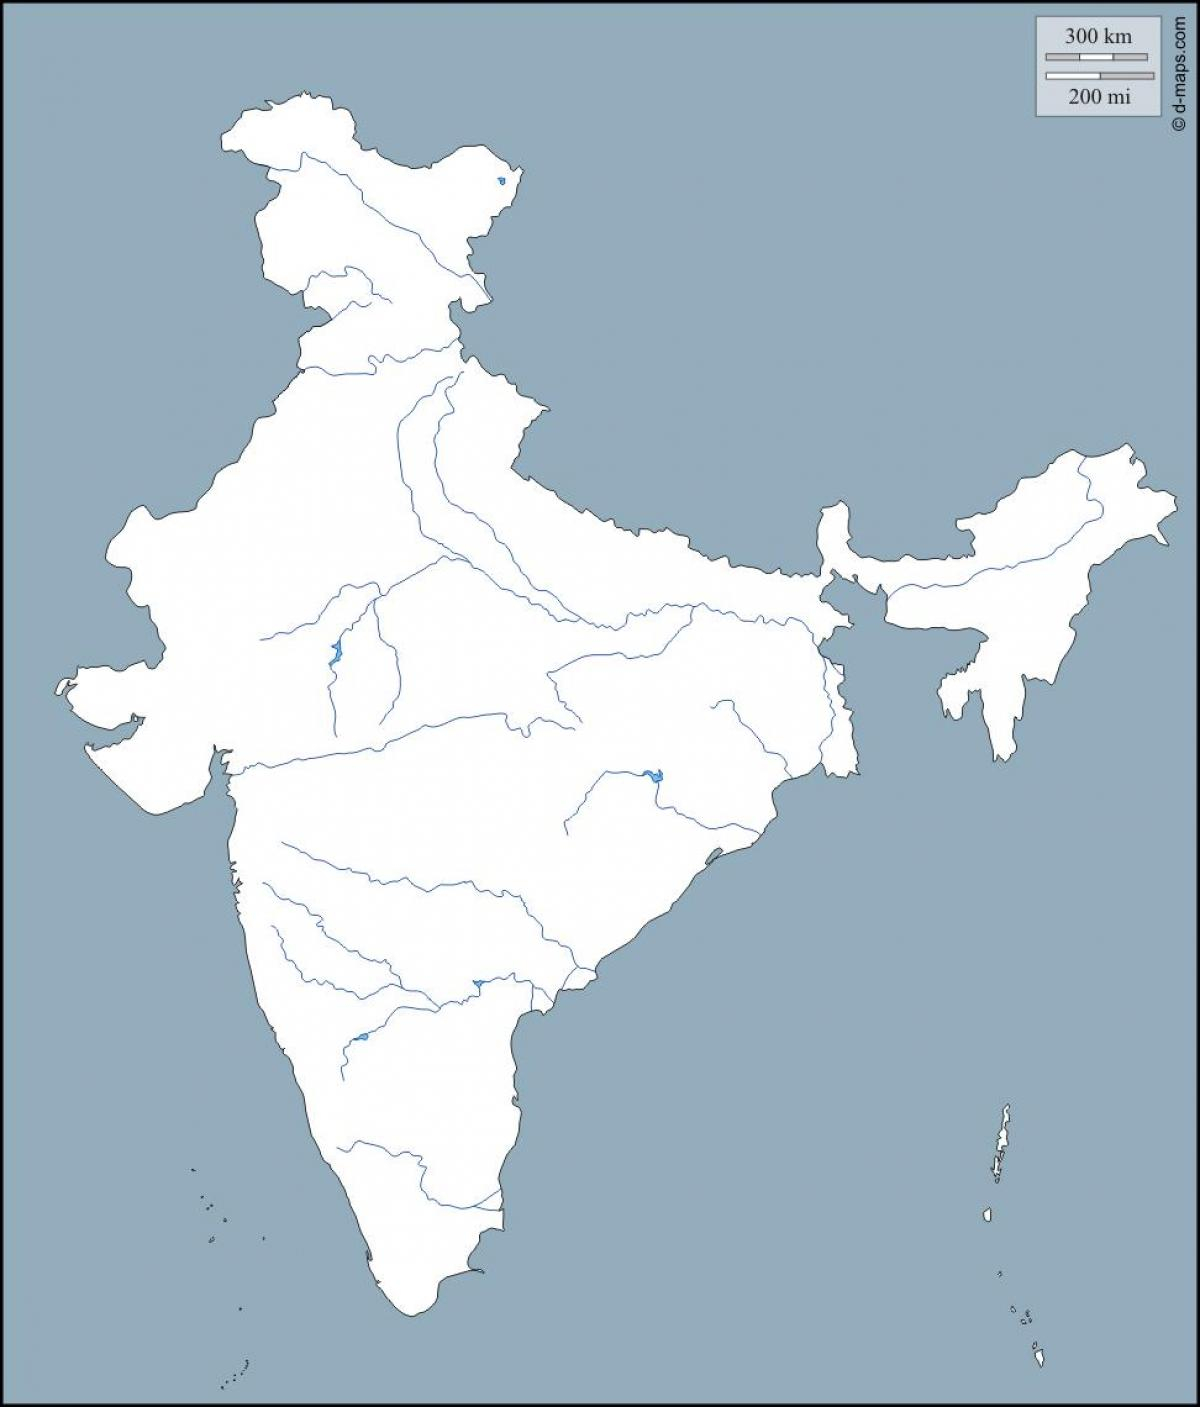 India River Map Outline India River Outline Map 